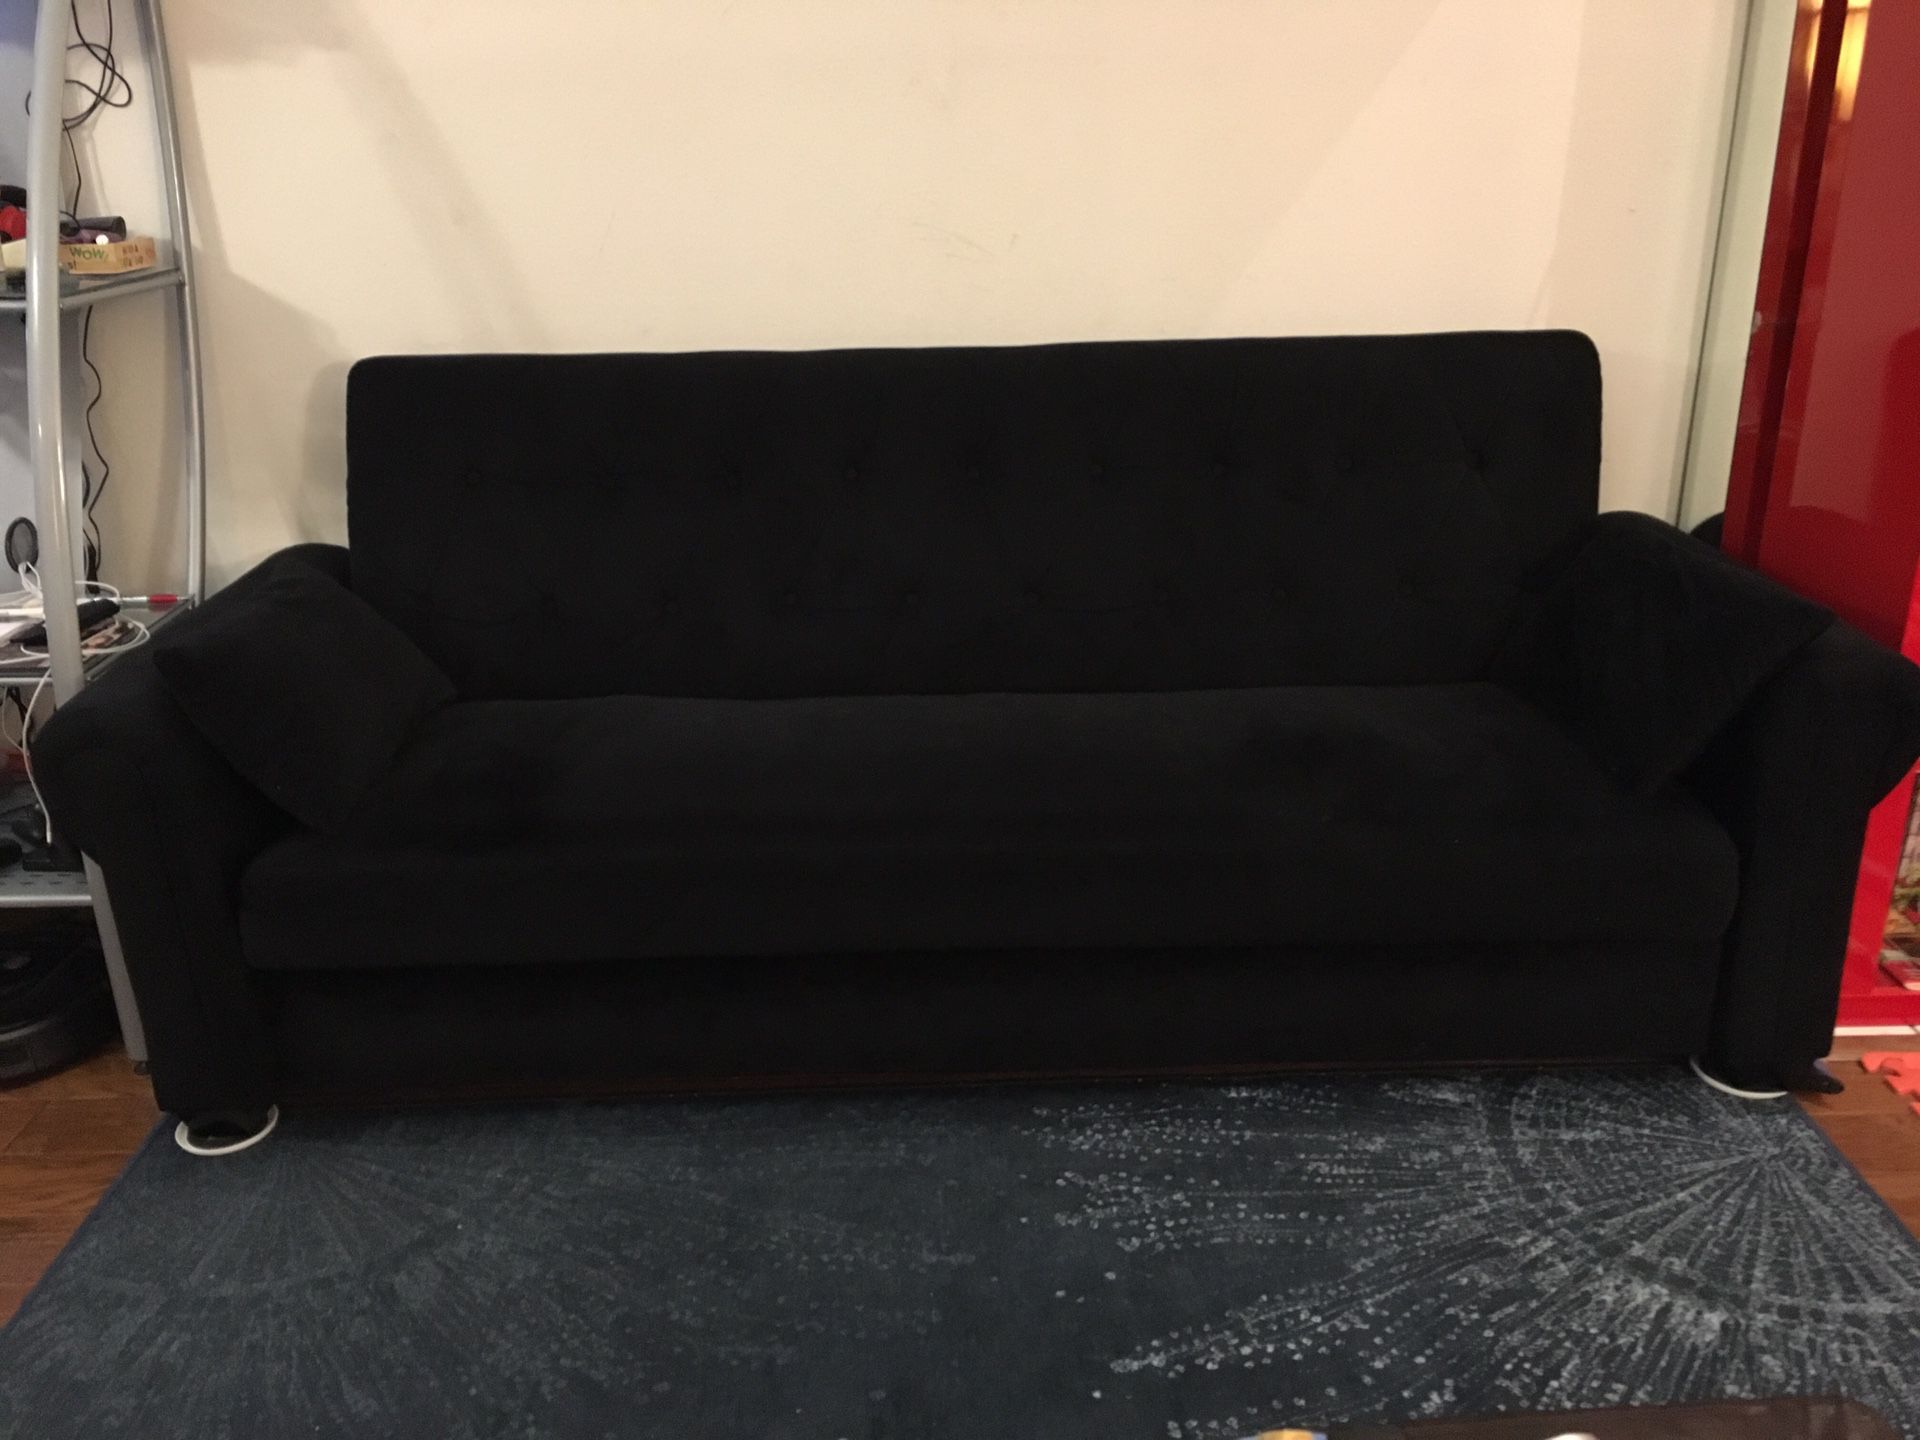 *** Pending Pickup*** Convertible couch / sofa